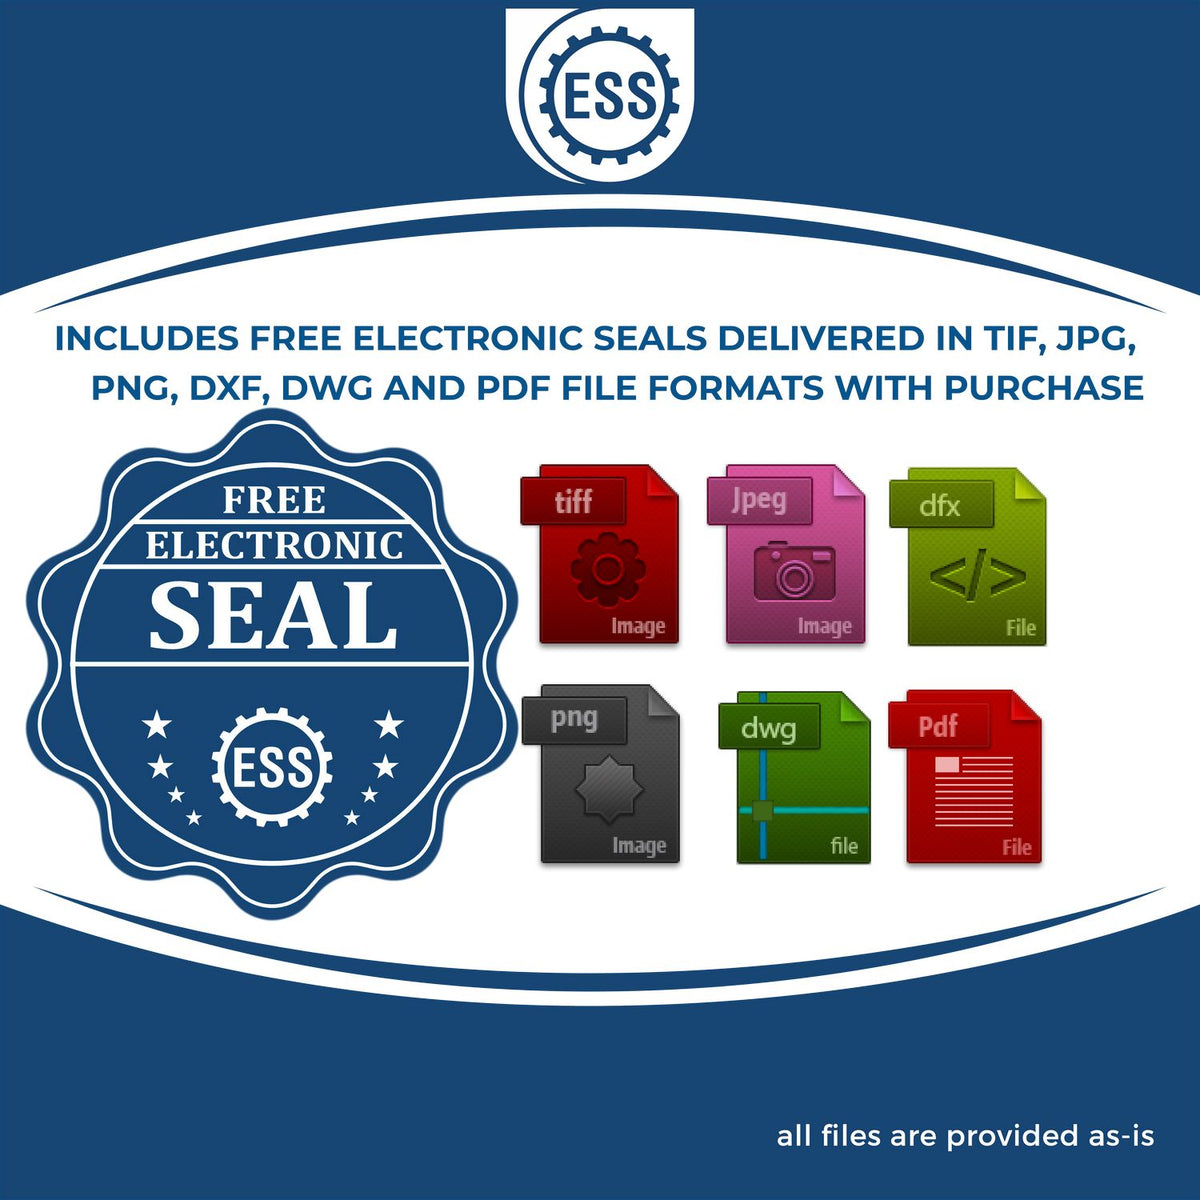 An infographic for the free electronic seal for the Self-Inking Georgia PE Stamp illustrating the different file type icons such as DXF, DWG, TIF, JPG and PNG.